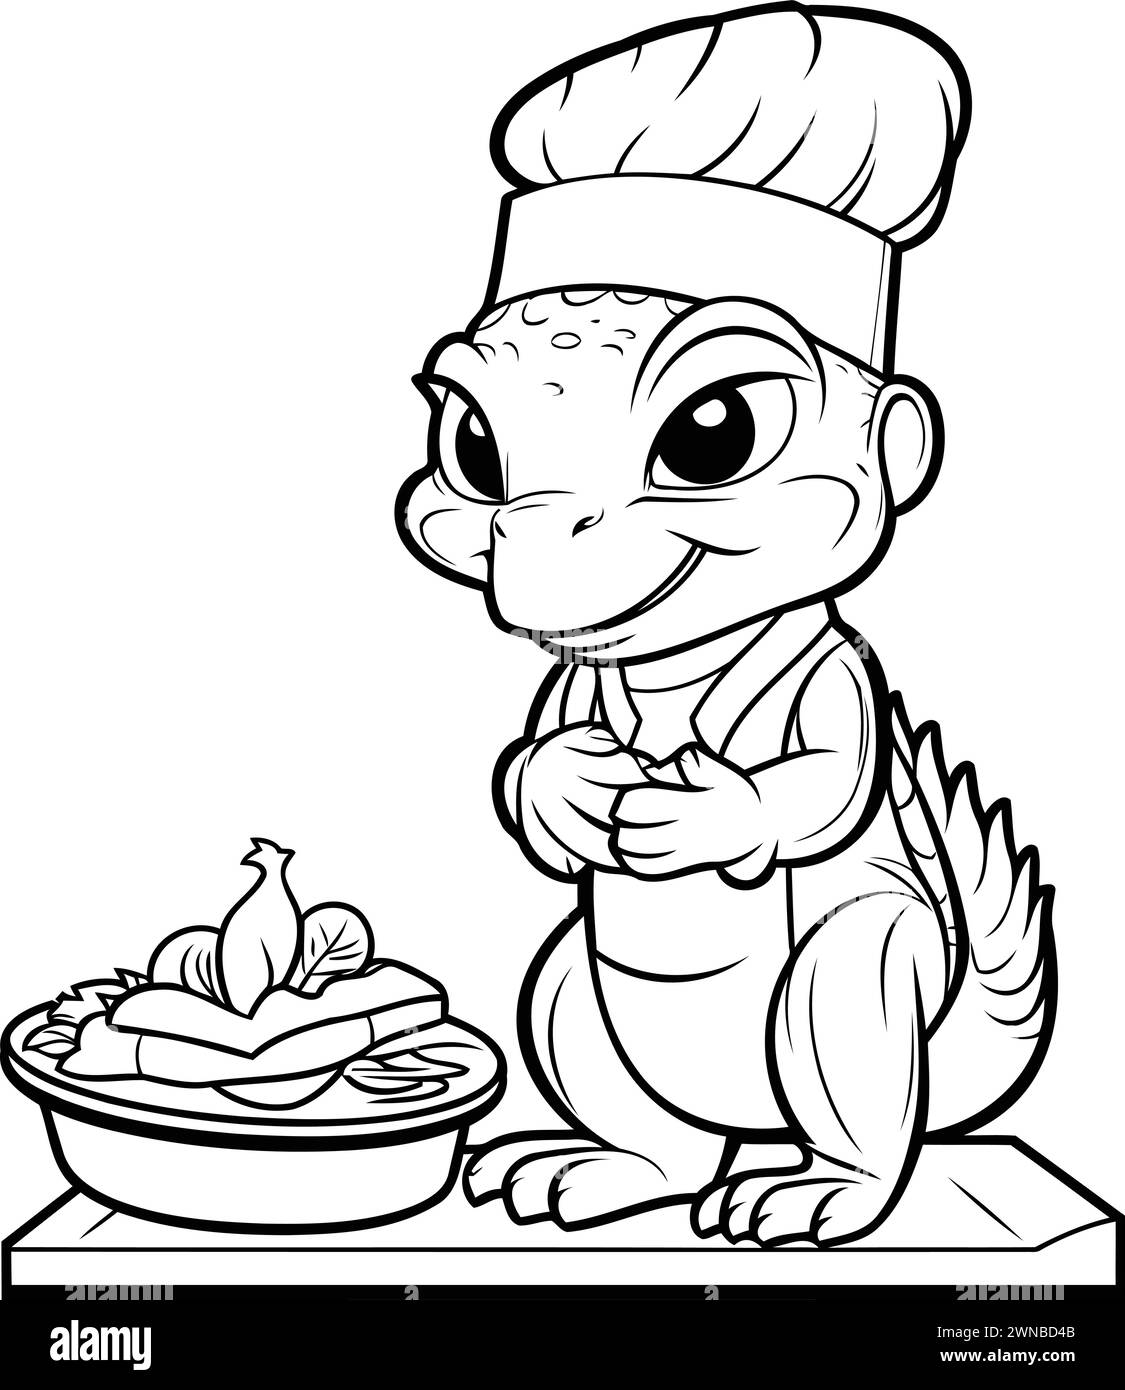 Vector illustration of Cartoon crocodile chef with a bowl of food. Stock Vector